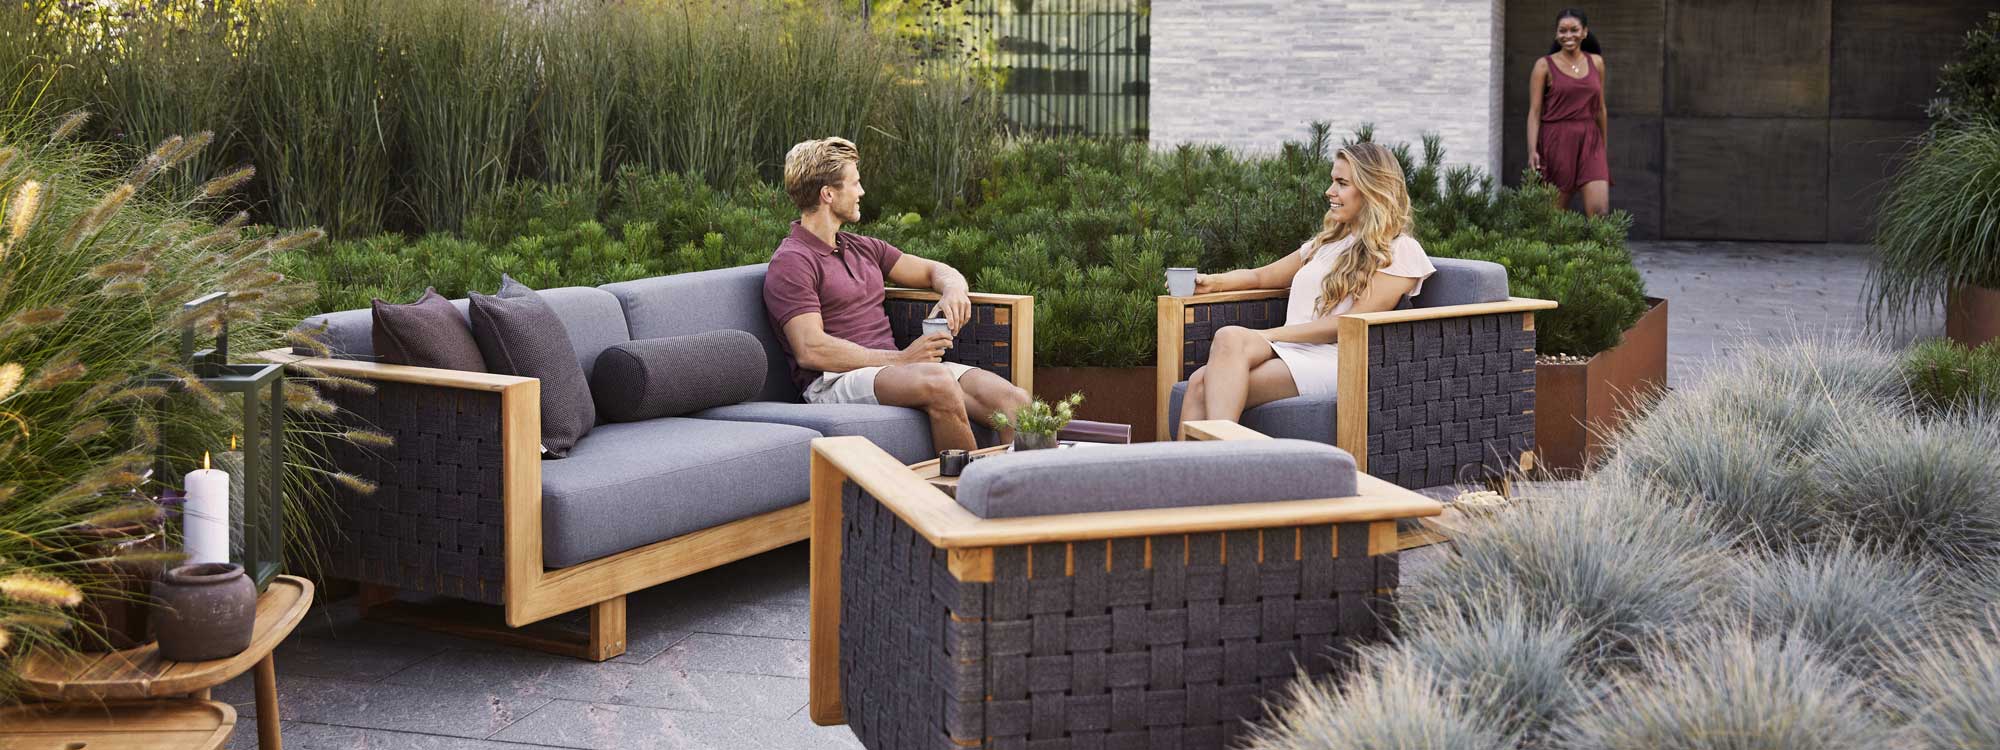 Angle GARDEN LOUNGE FURNITURE - 3 Seat MODERN Garden SOFA & Outdoor RELAX CHAIR In HIGH QUALITY Outdoor Furniture Materials By CANE-LINE Scandi OUTDOOR FURNITURE